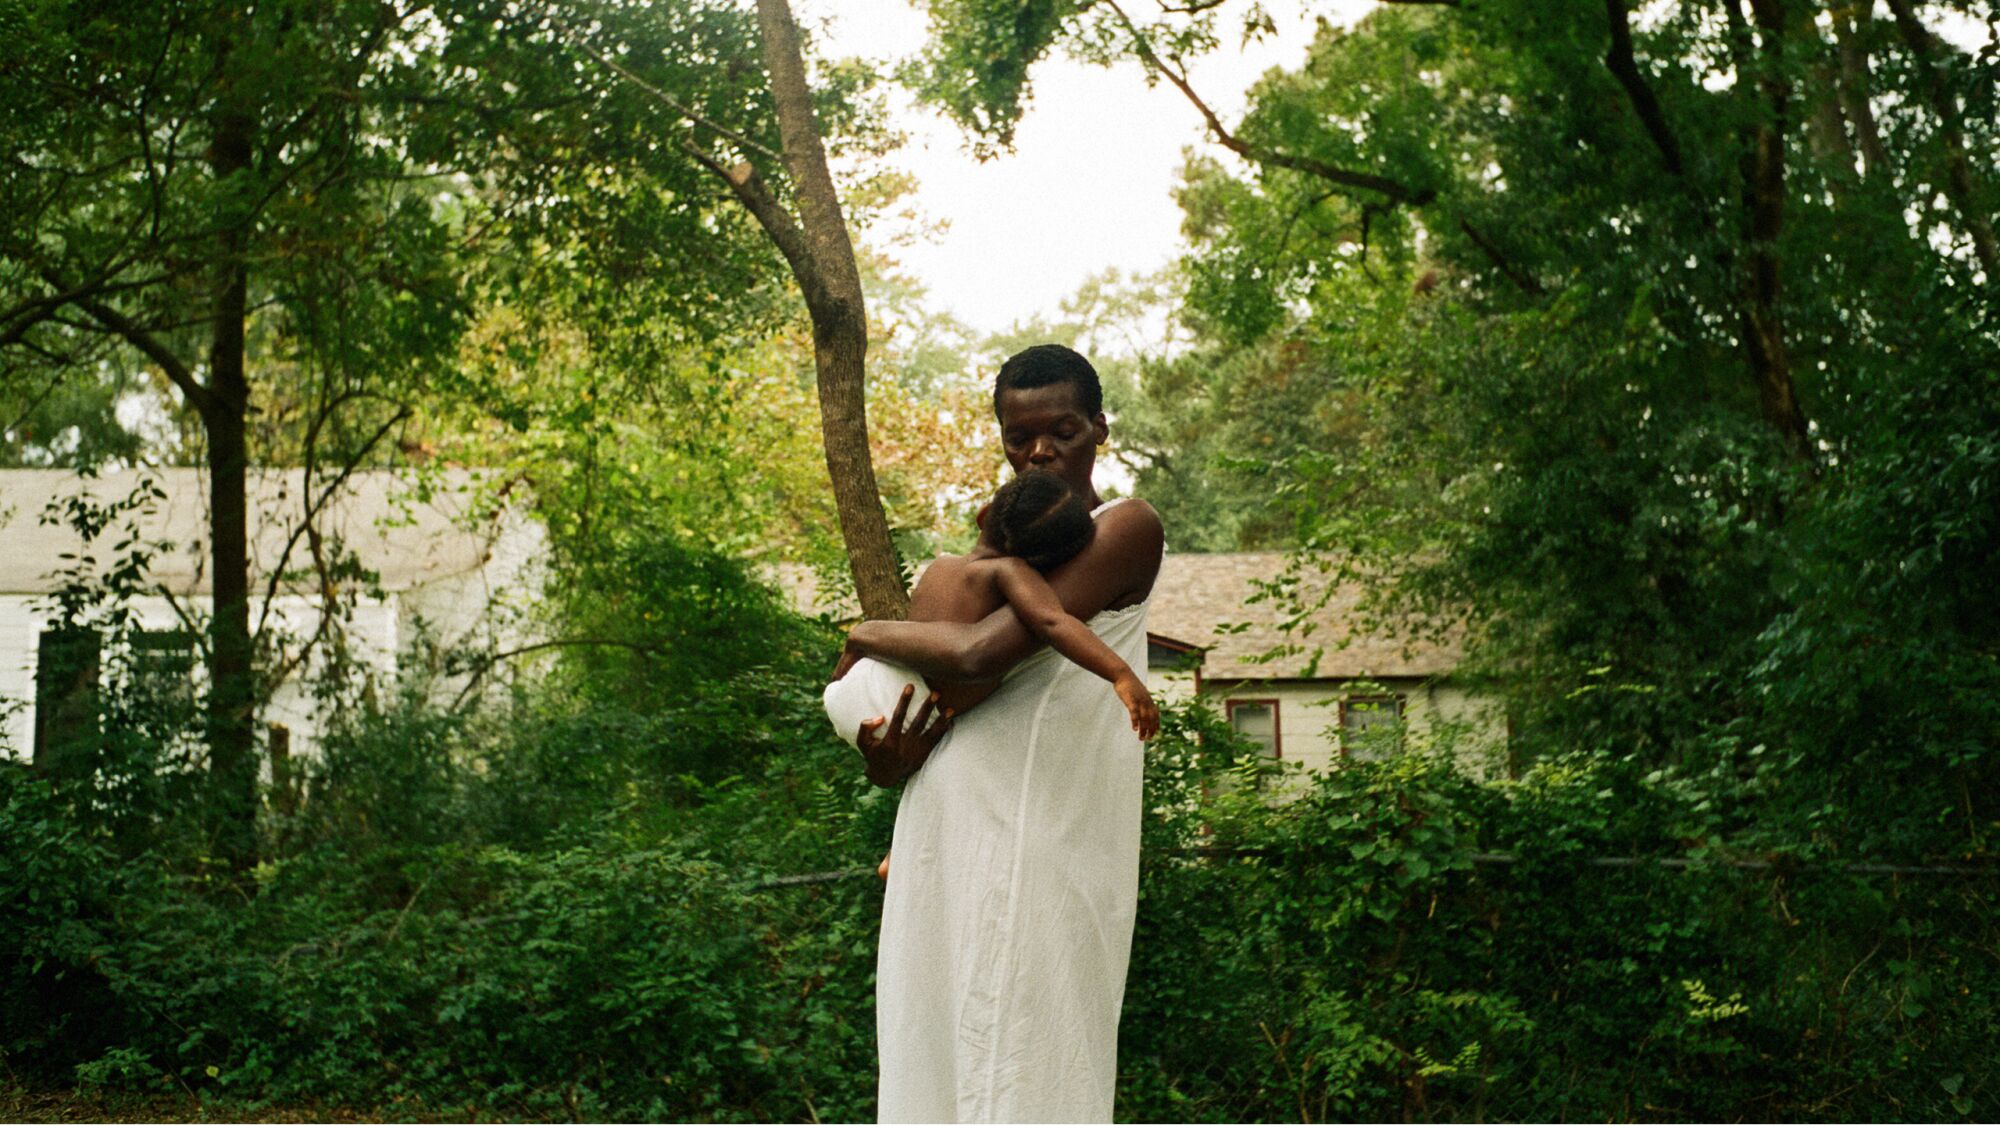 A woman in a white dress in a grove of trees holds a child.